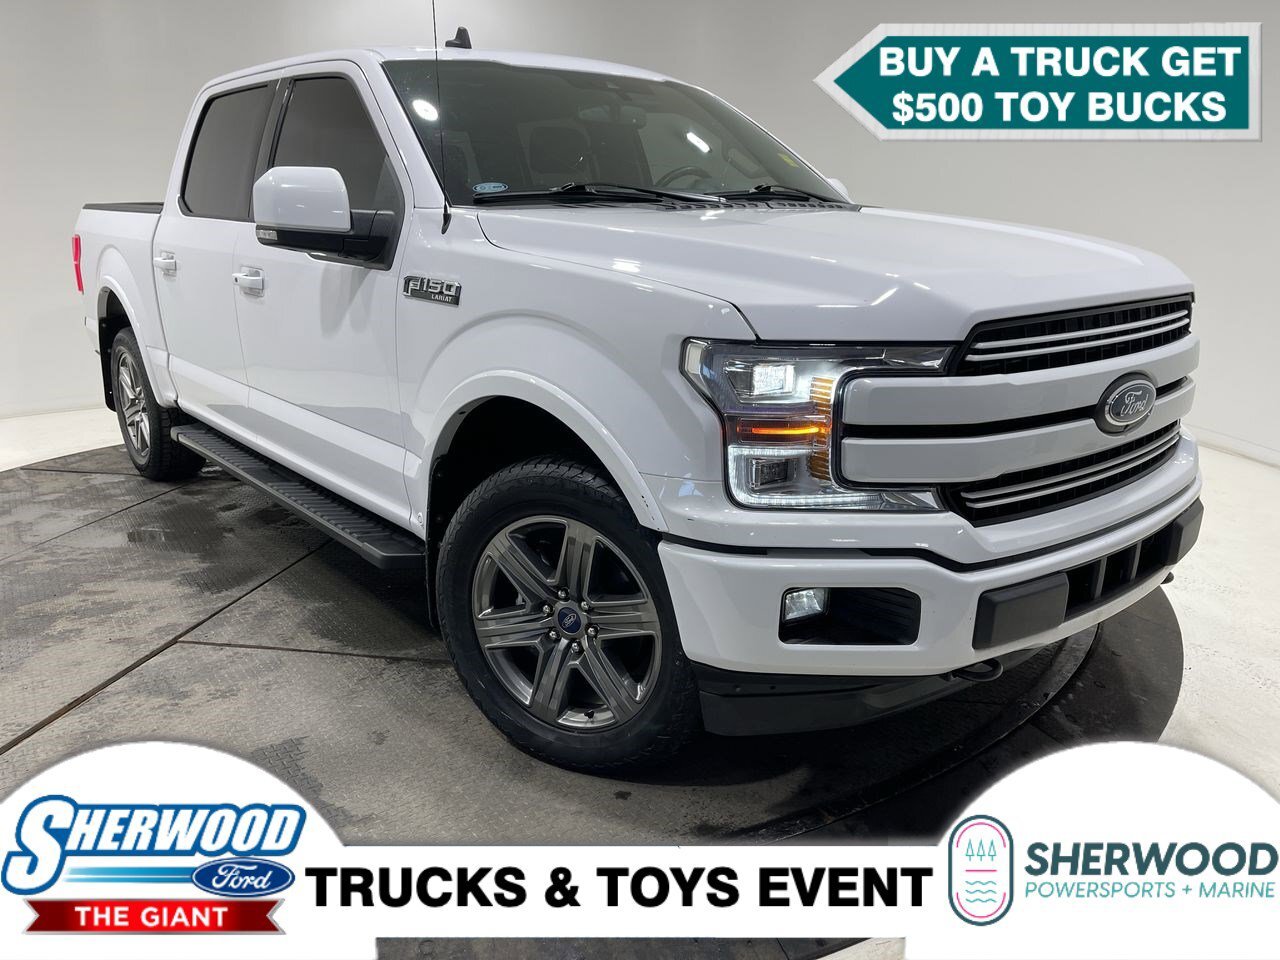 2020 Ford F-150 Lariat - $0 Down $199 Weekly - CLEAN CARFAX